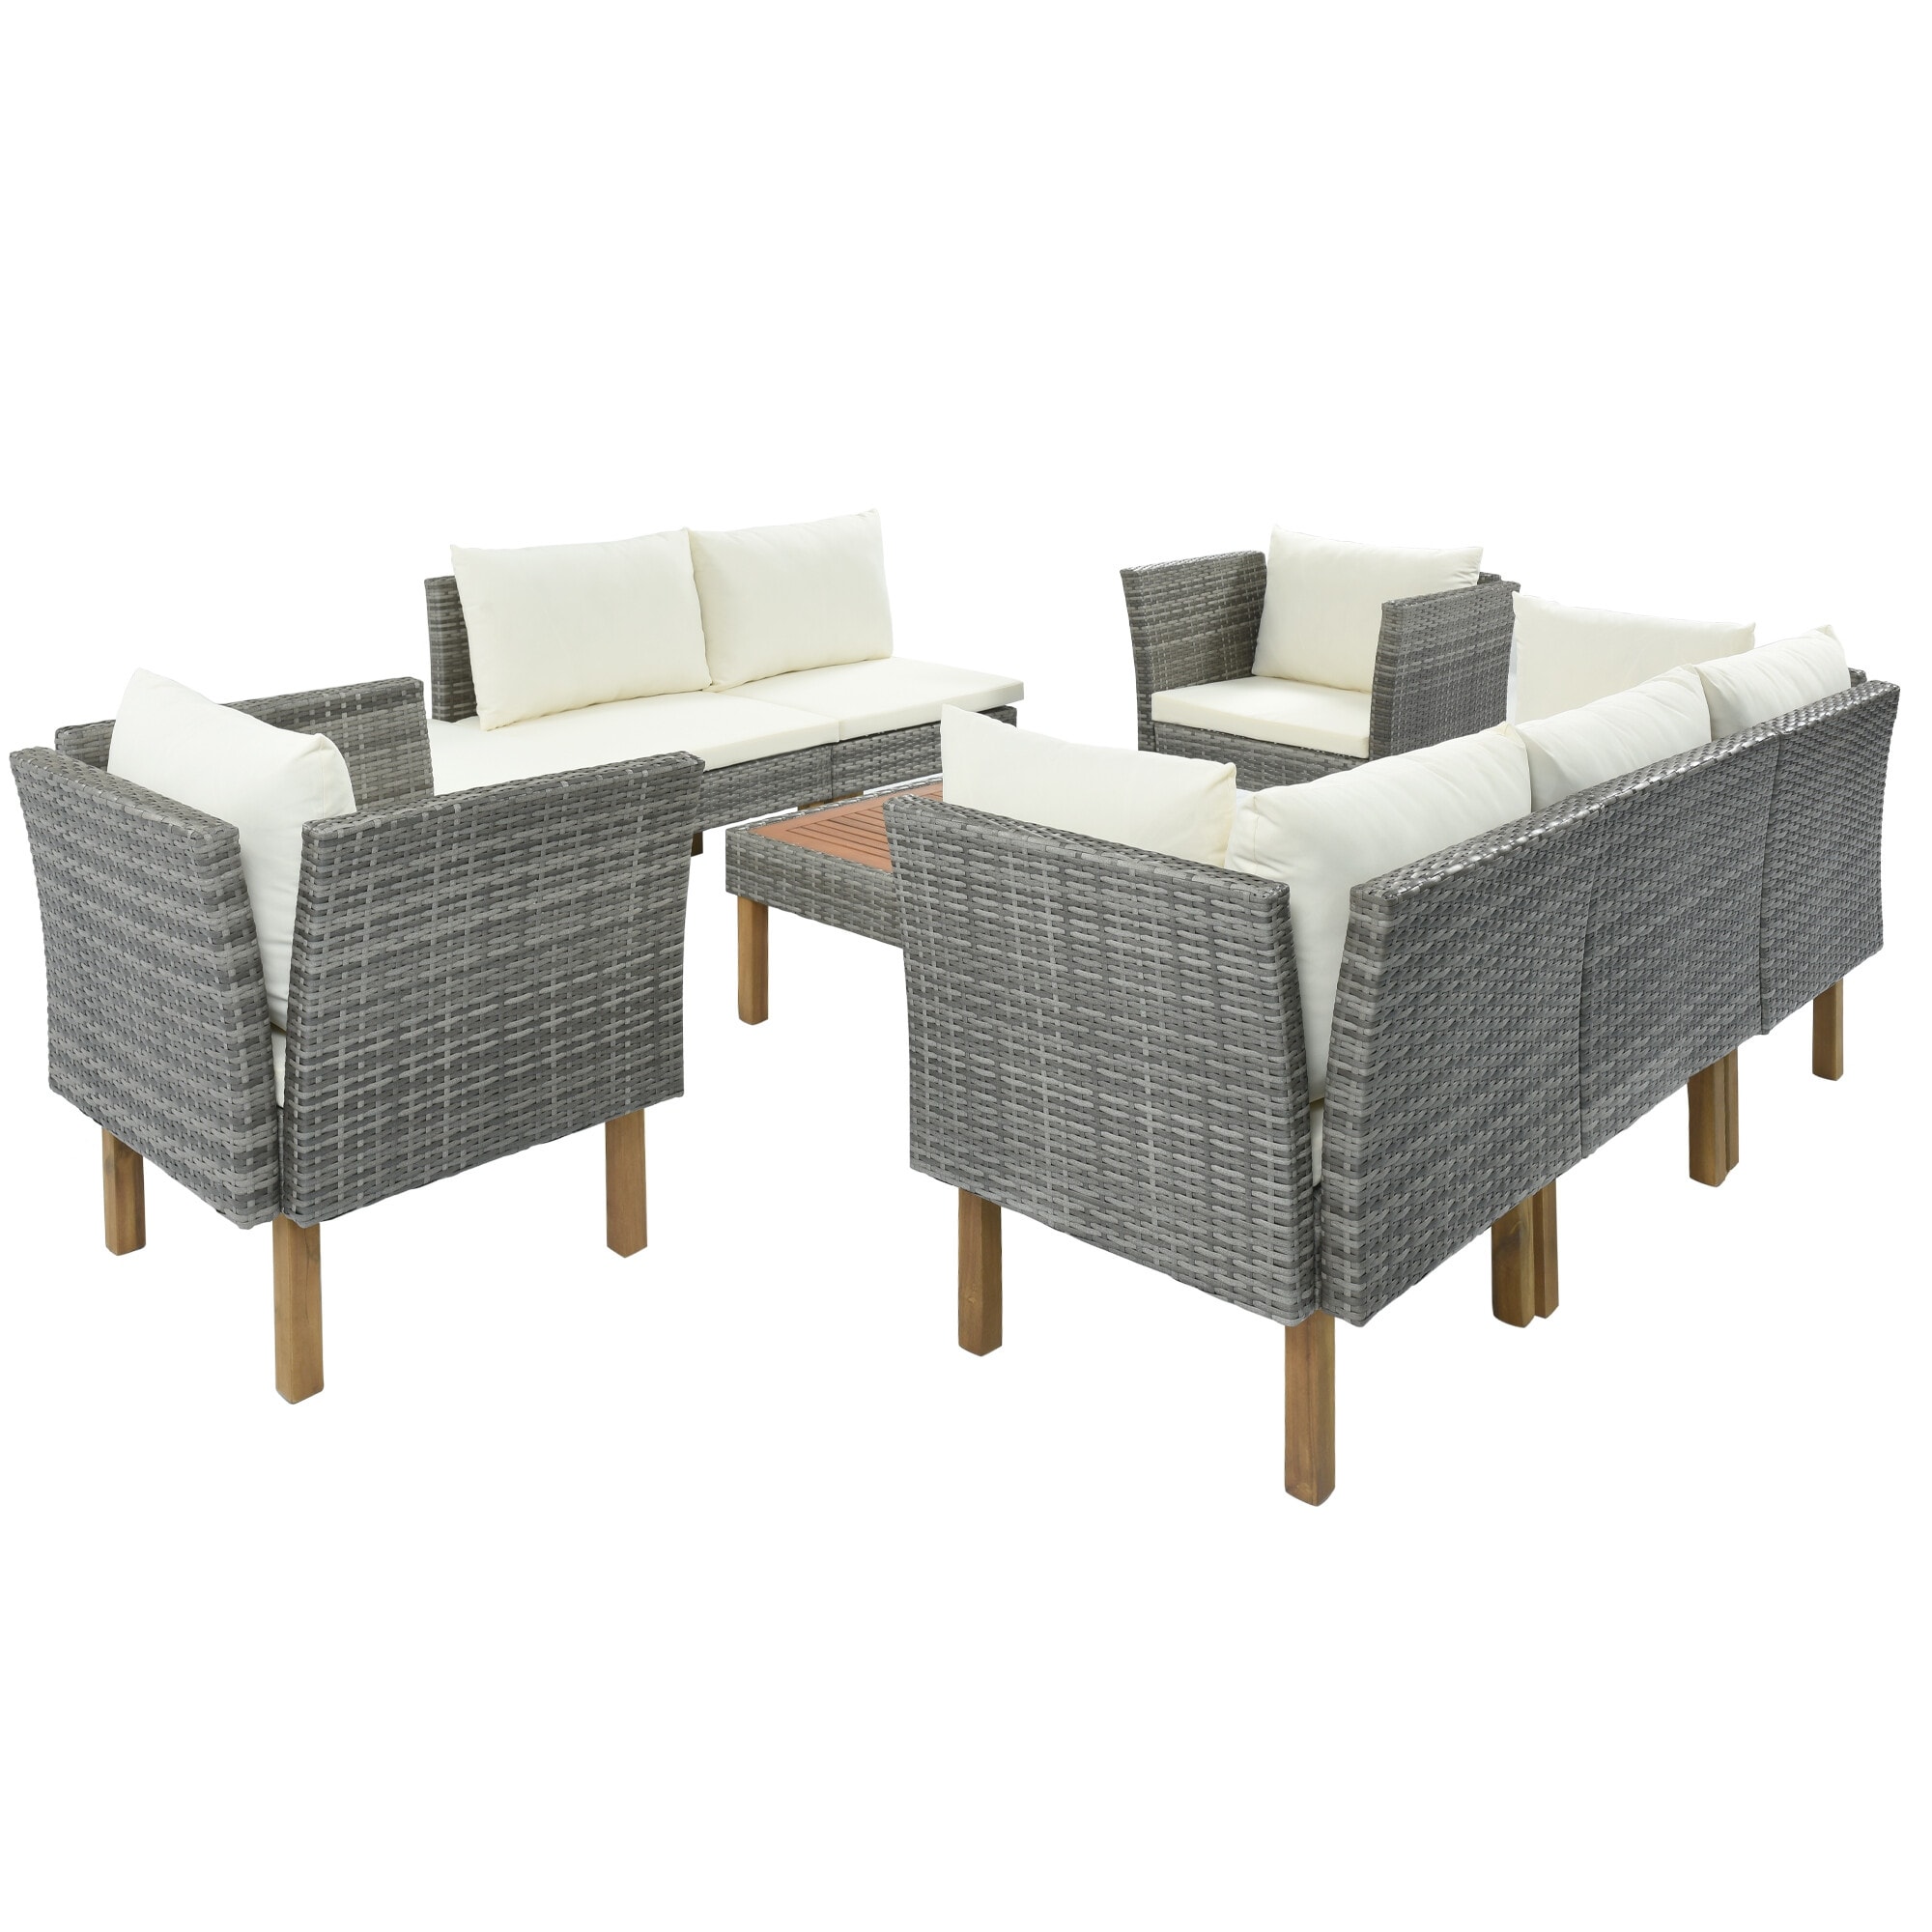 9 Piece Outdoor Patio Wicker Sofa Set  Pe Rattan Sofa Set  With Wood Legs  Acacia Wood Tabletop  Armrest Chairs